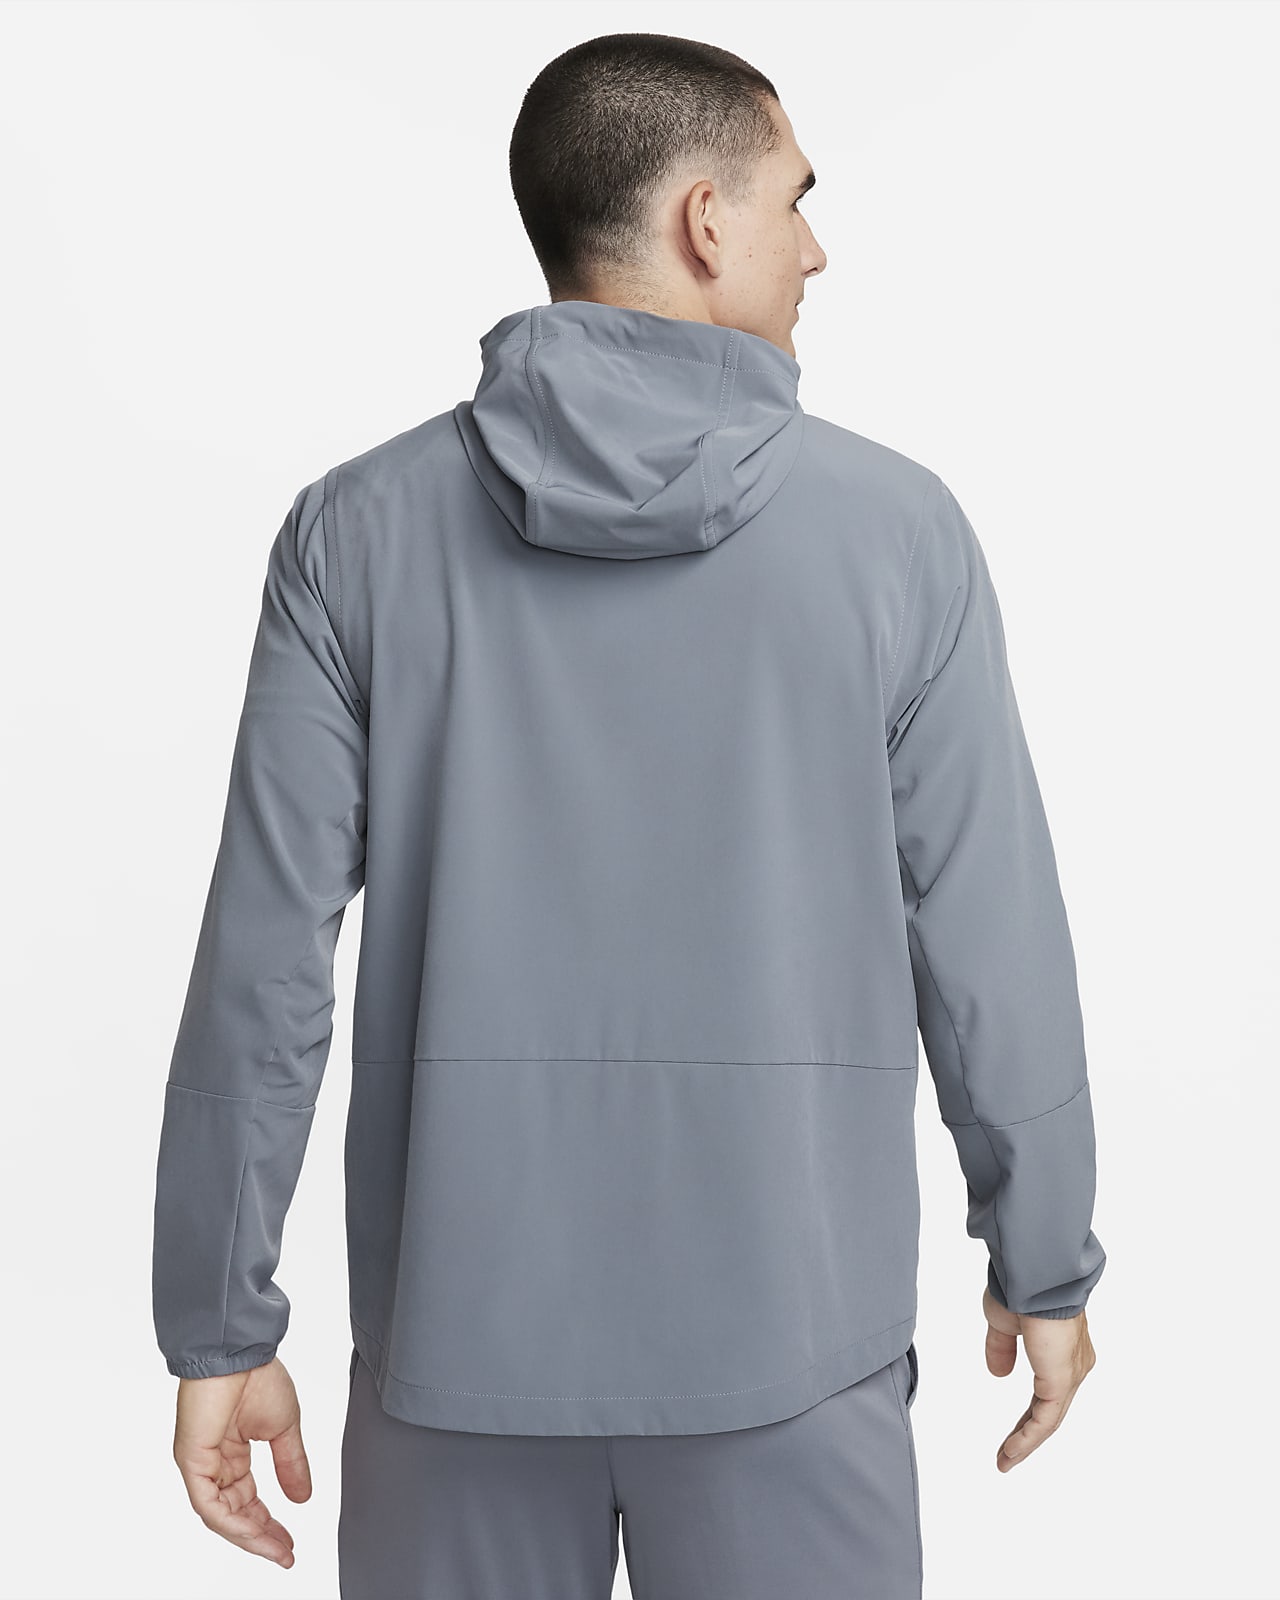 All in Motion water-resistant jacket, It’s a great